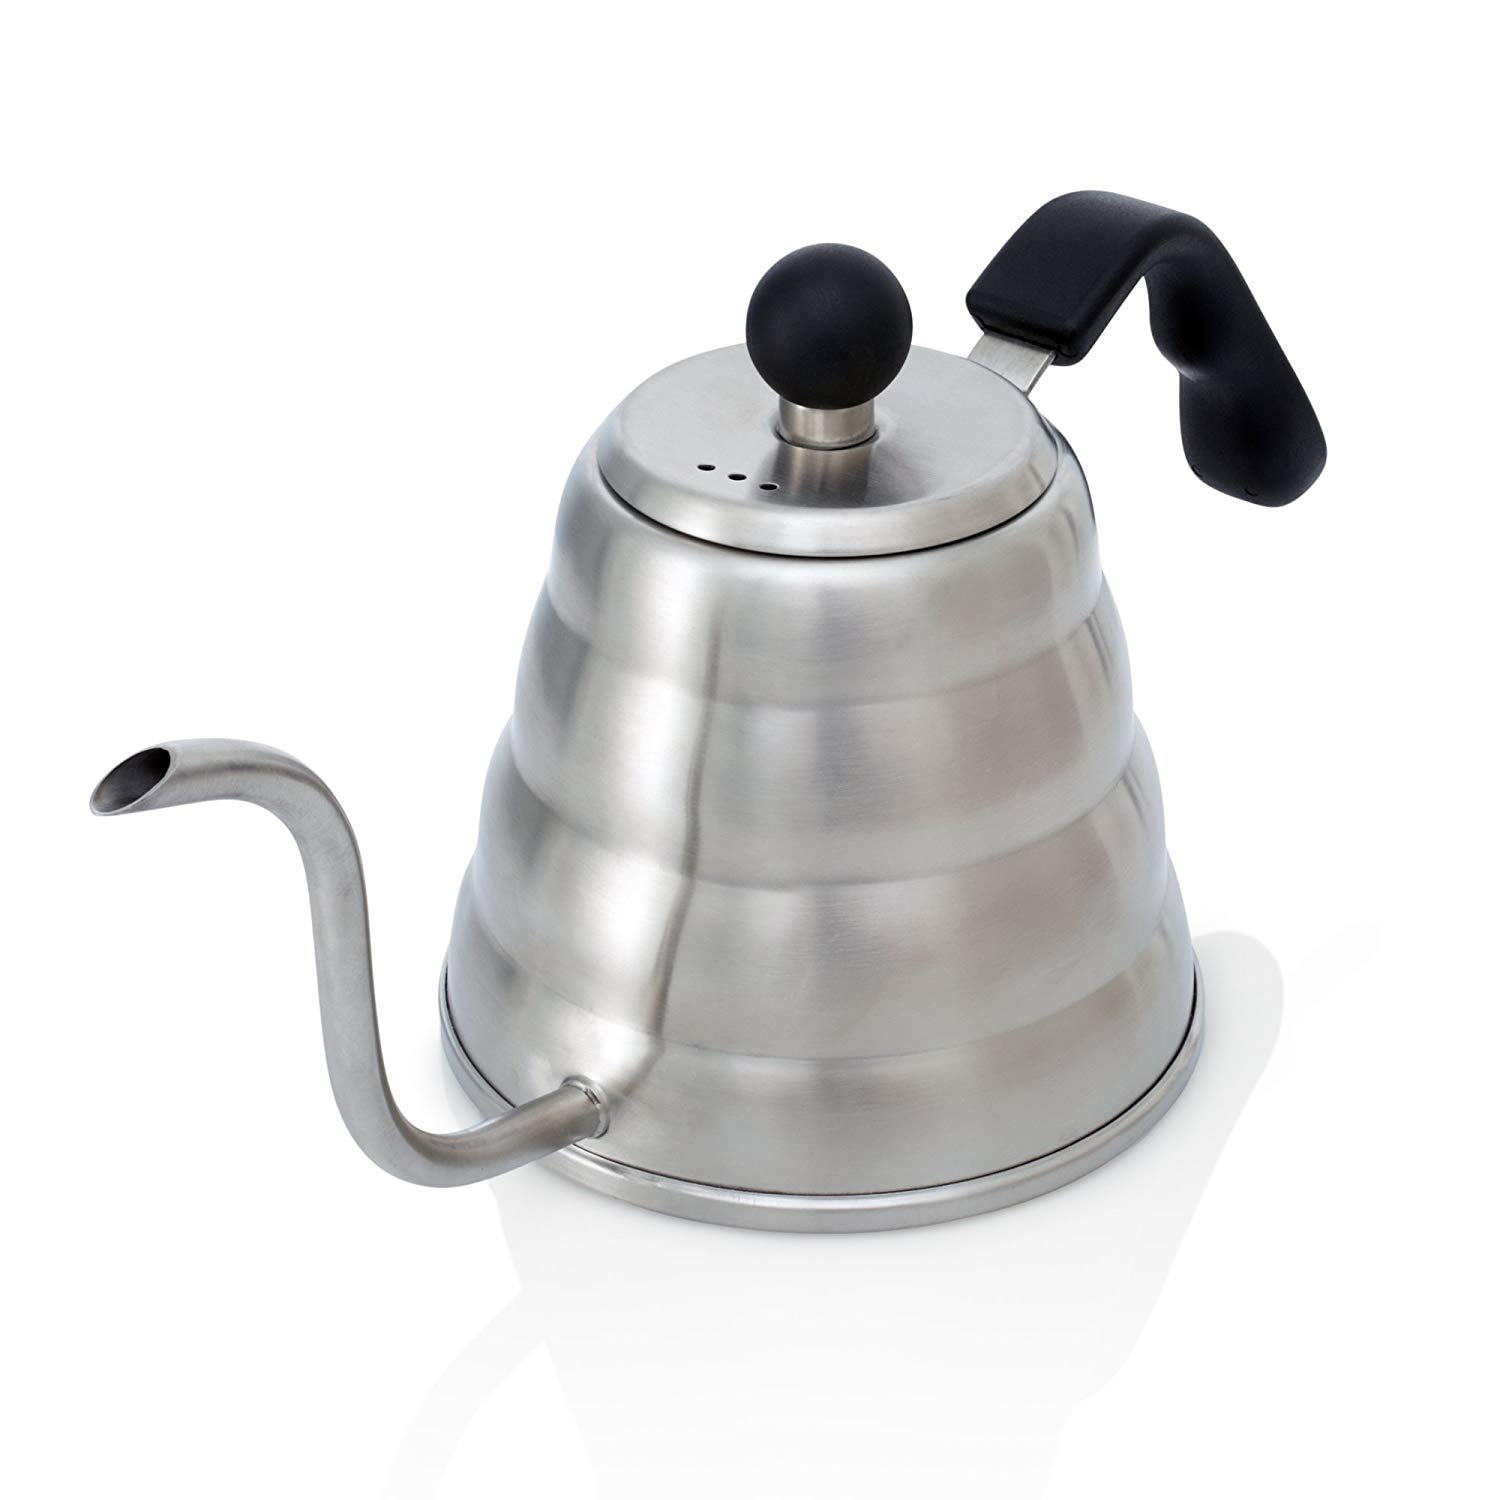 Gooseneck Kettle Stock Photos and Pictures - 577 Images